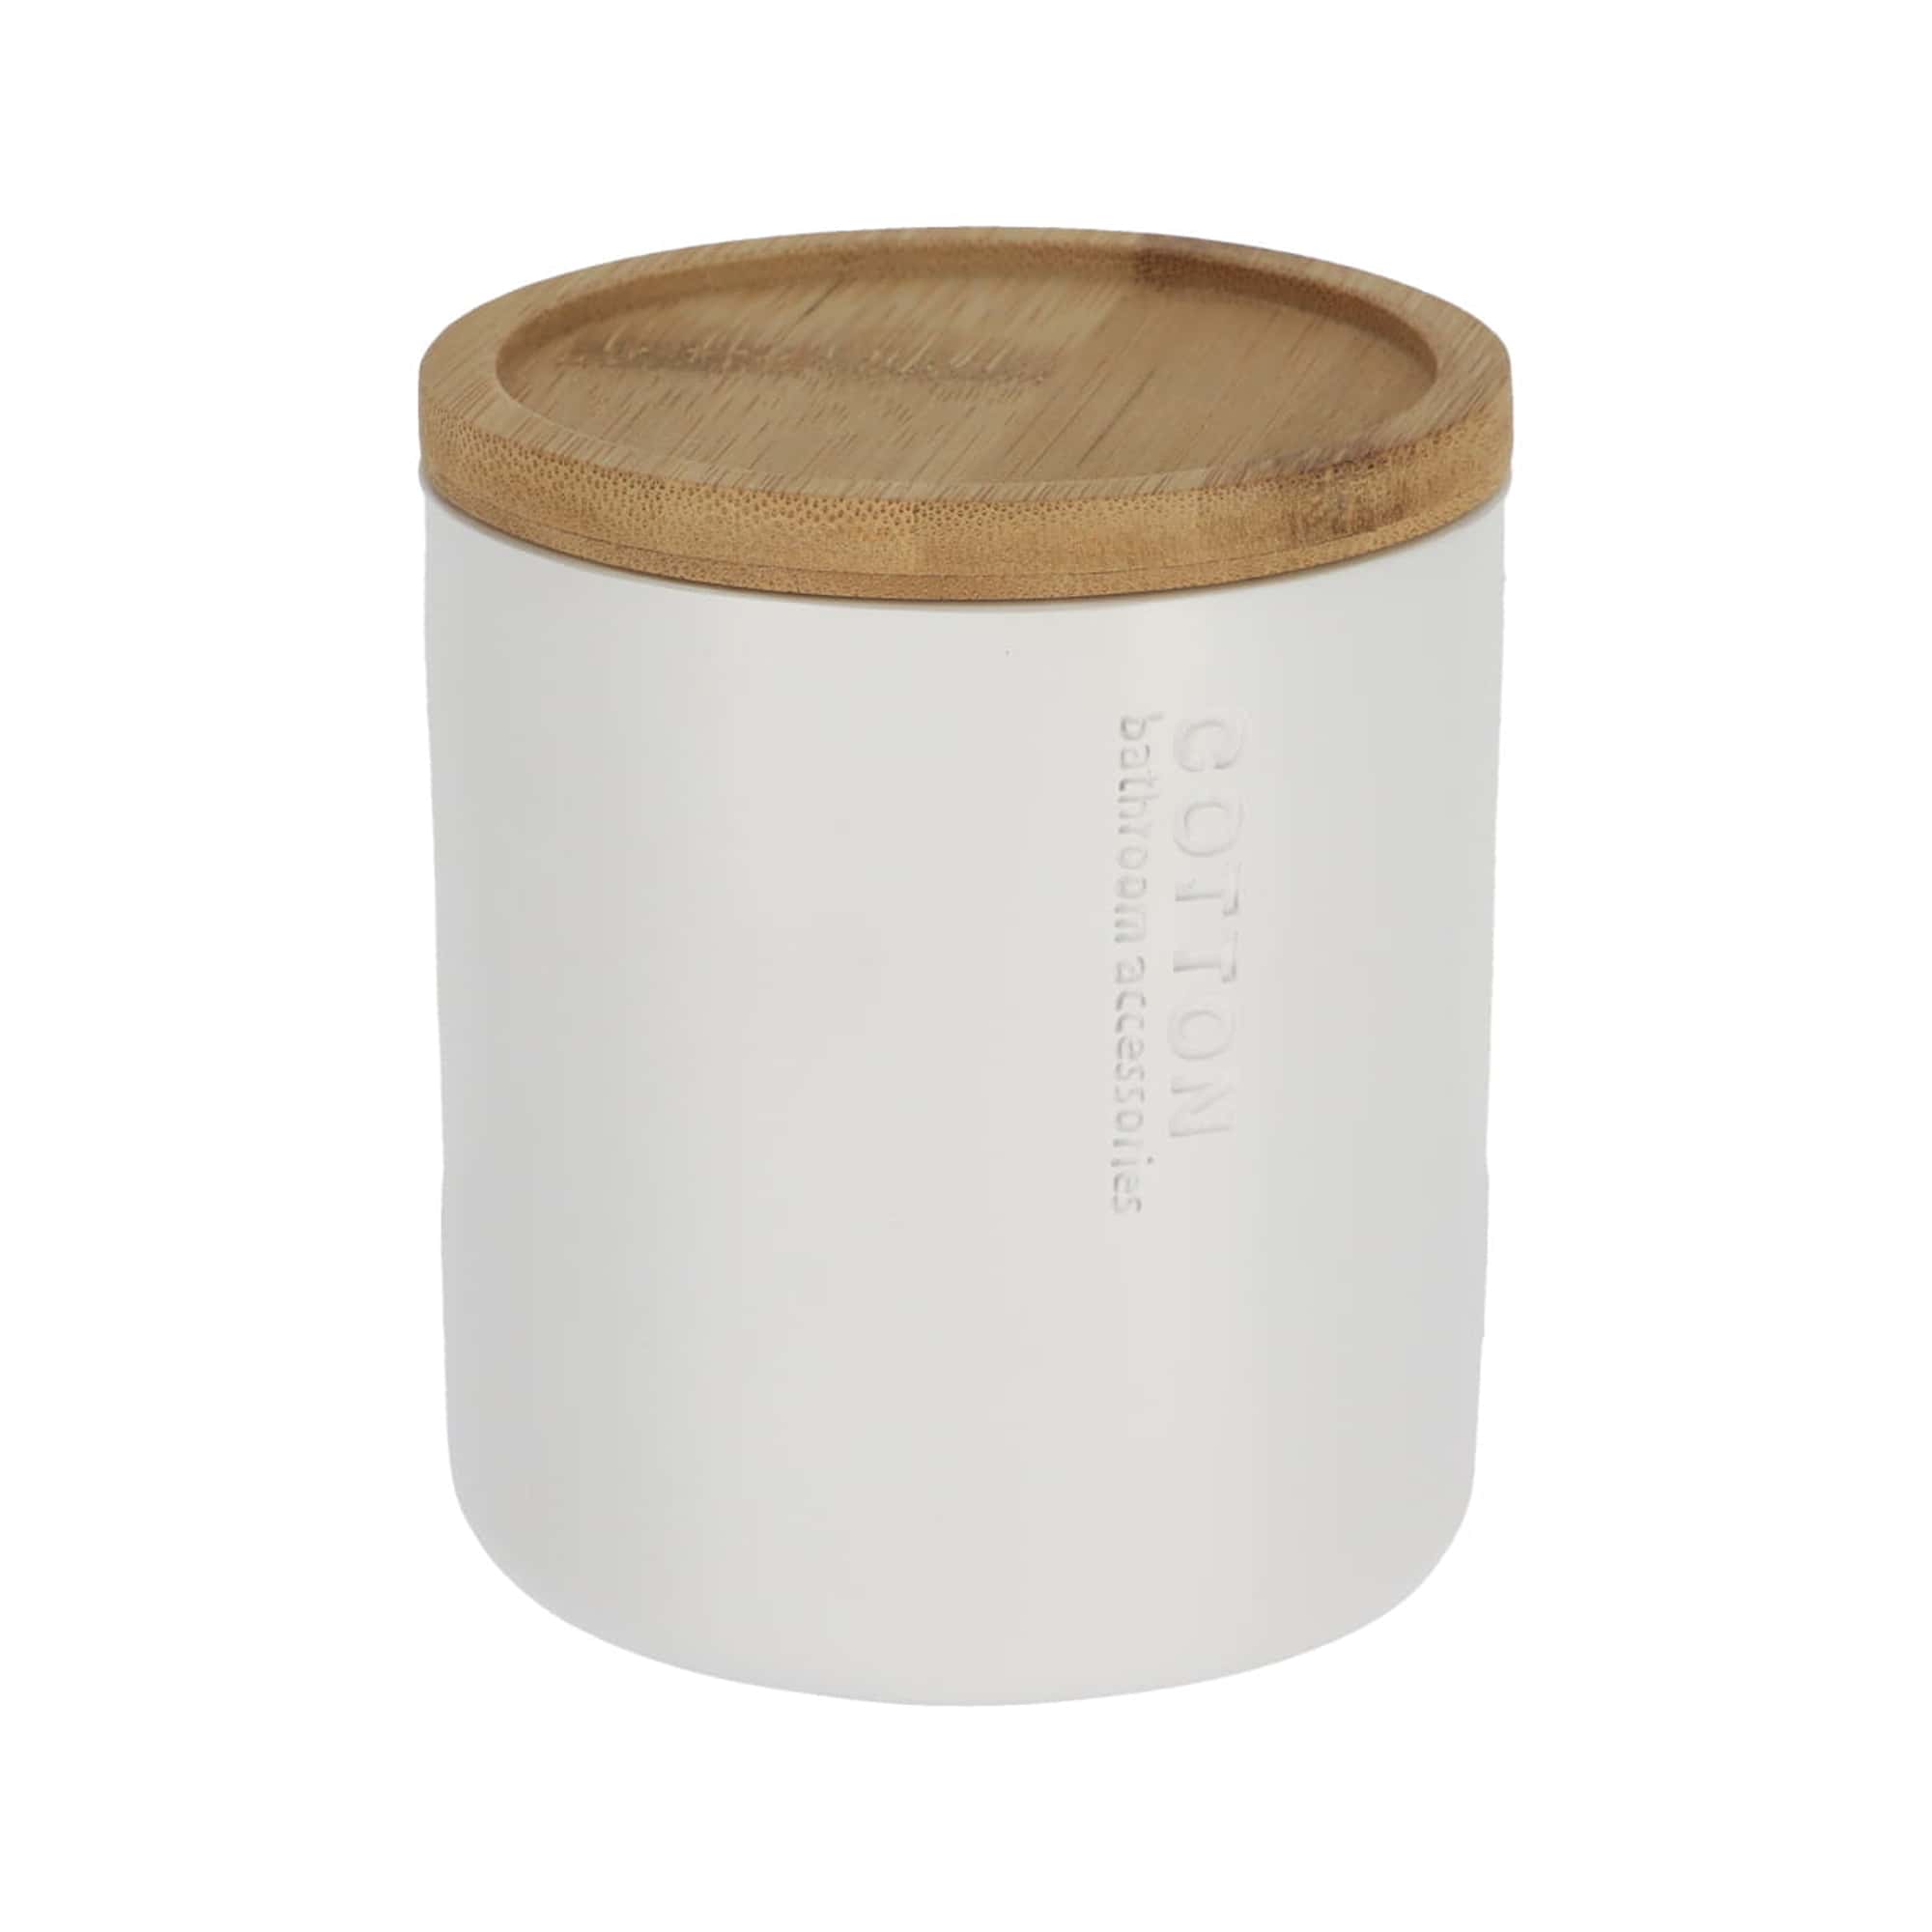 Pure Matte White Cotton Ball Jar with Natural Bamboo Lid Polyresin Bathroom Organizer